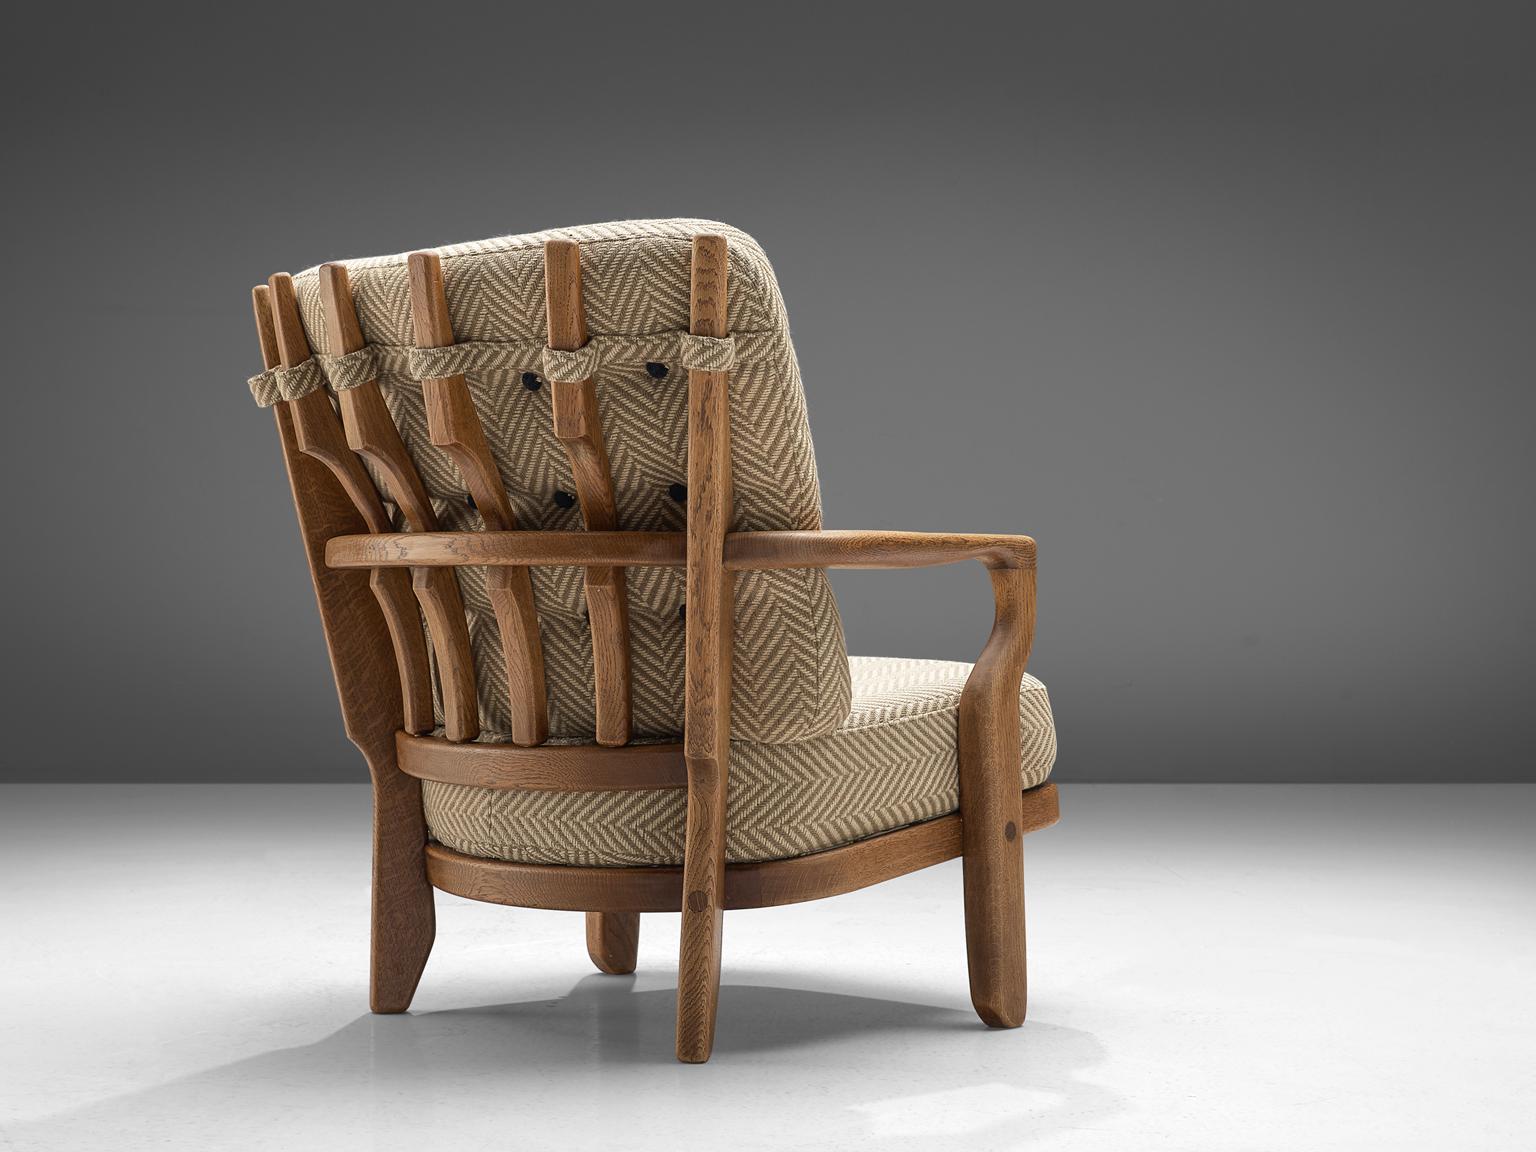 Guillerme et Chambron, lounge chair, oak and beige upholstery, France, 1960s. 

This distinctive chair in light patinated oak is by the French designer duo Jacques Chambron (1914-2001) and Robert Guillerme (1913-1990). This lounge chair in solid